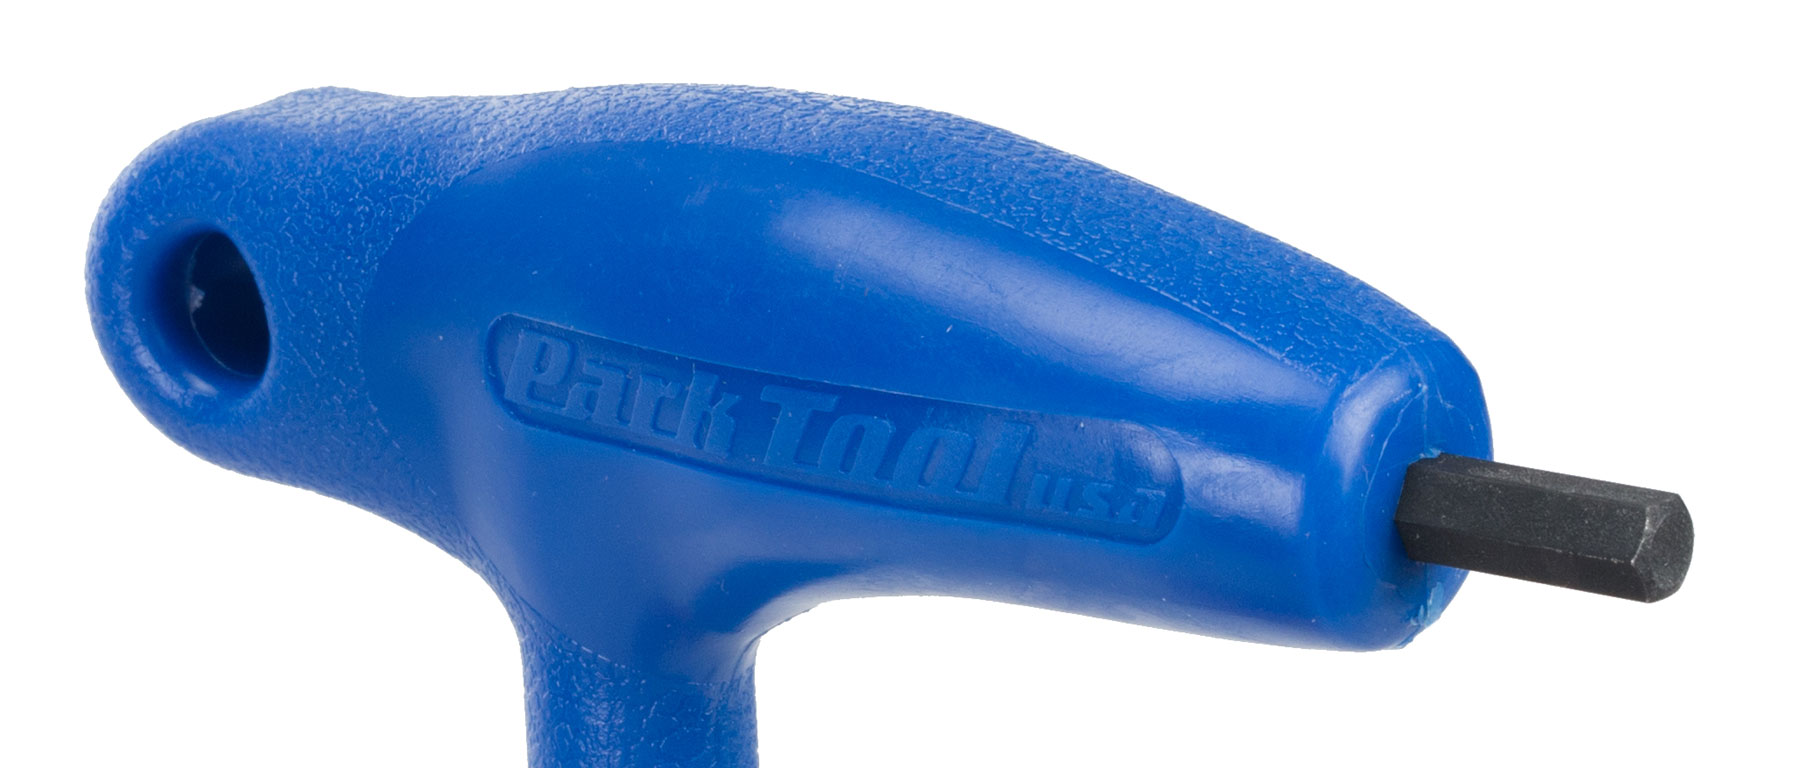 Park Tool PH P-Handled Hex Wrench